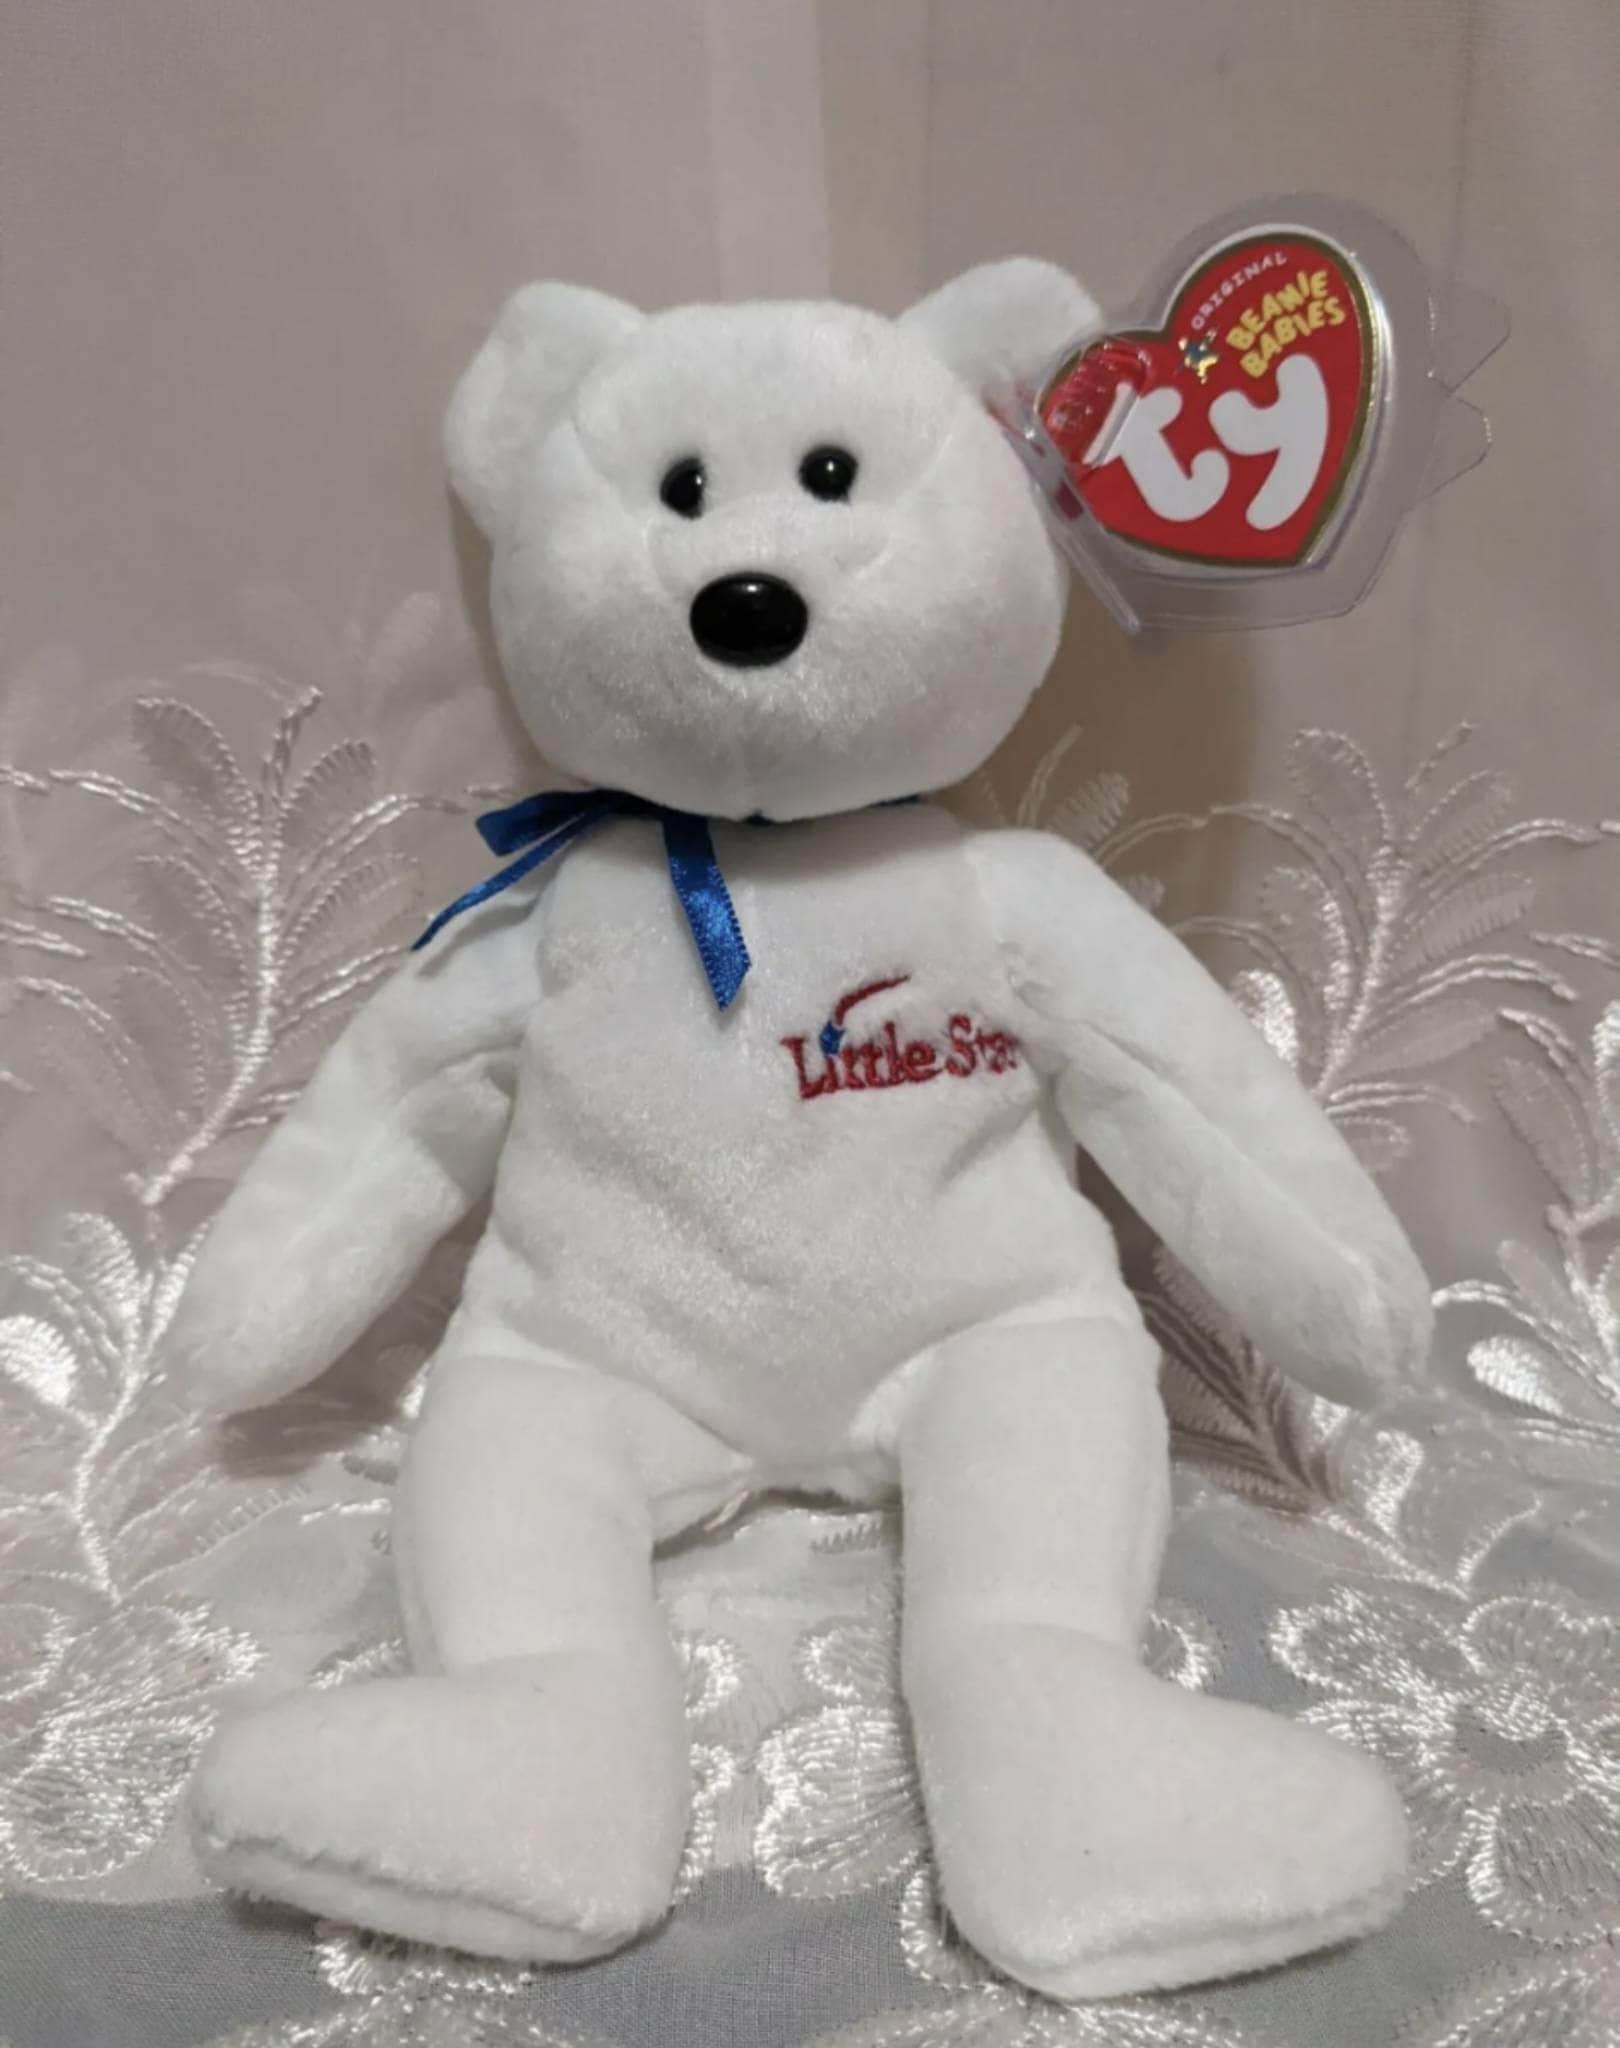 Ty Beanie Baby - Little Star The Children's Charity Bear (8.5 in) - Vintage Beanies Canada